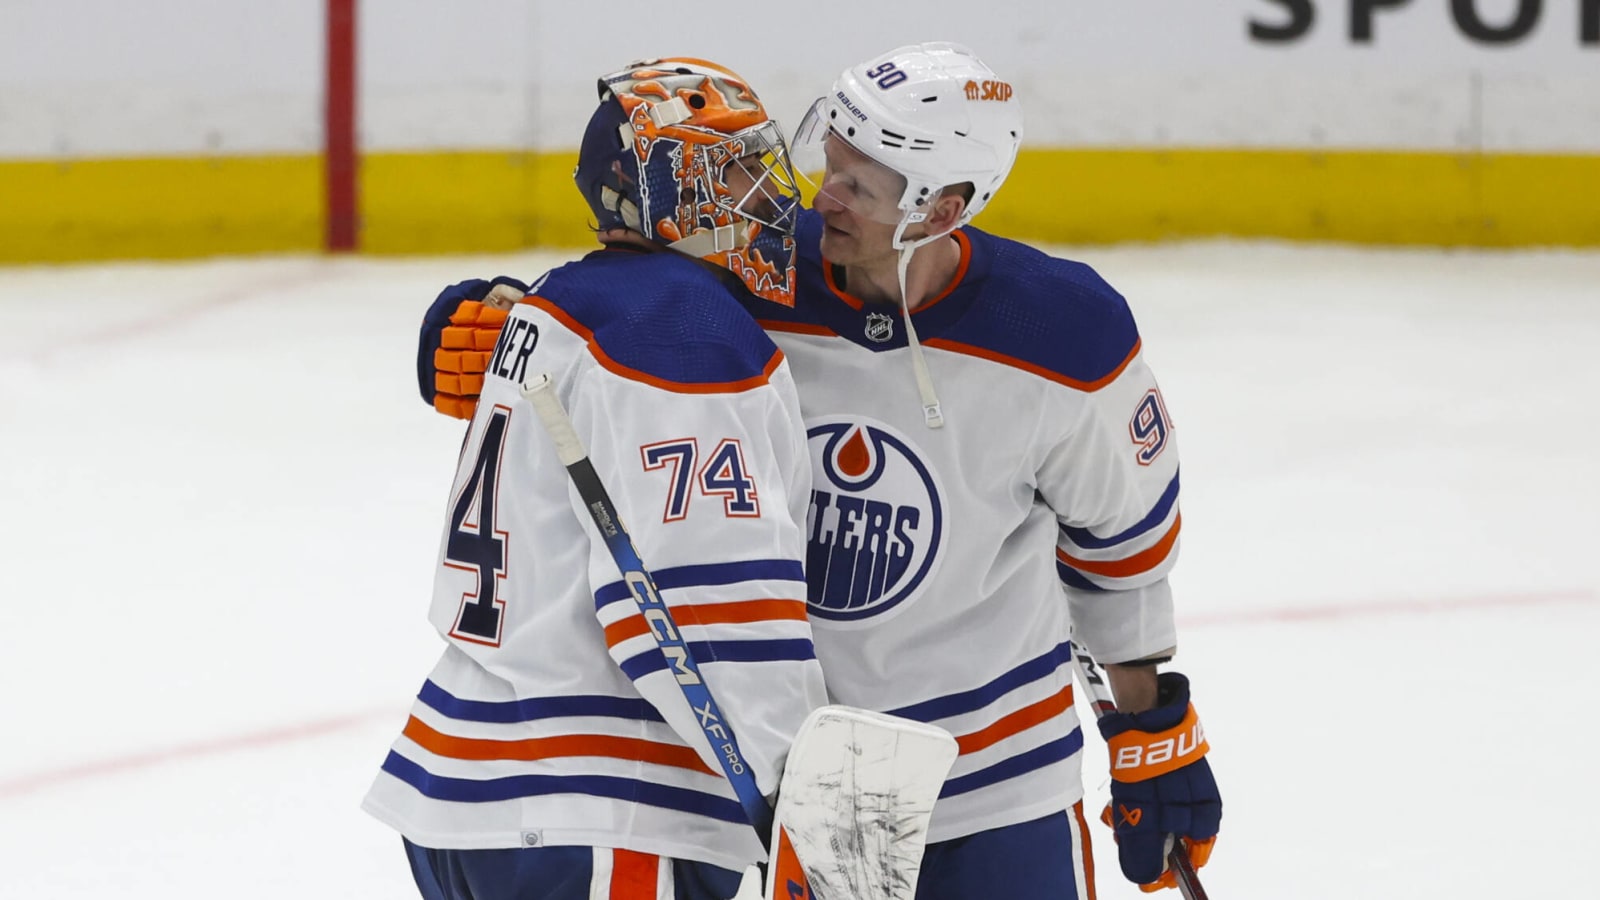 Oilers head back to Edmonton up 3-1 in the series and it feels fantastic